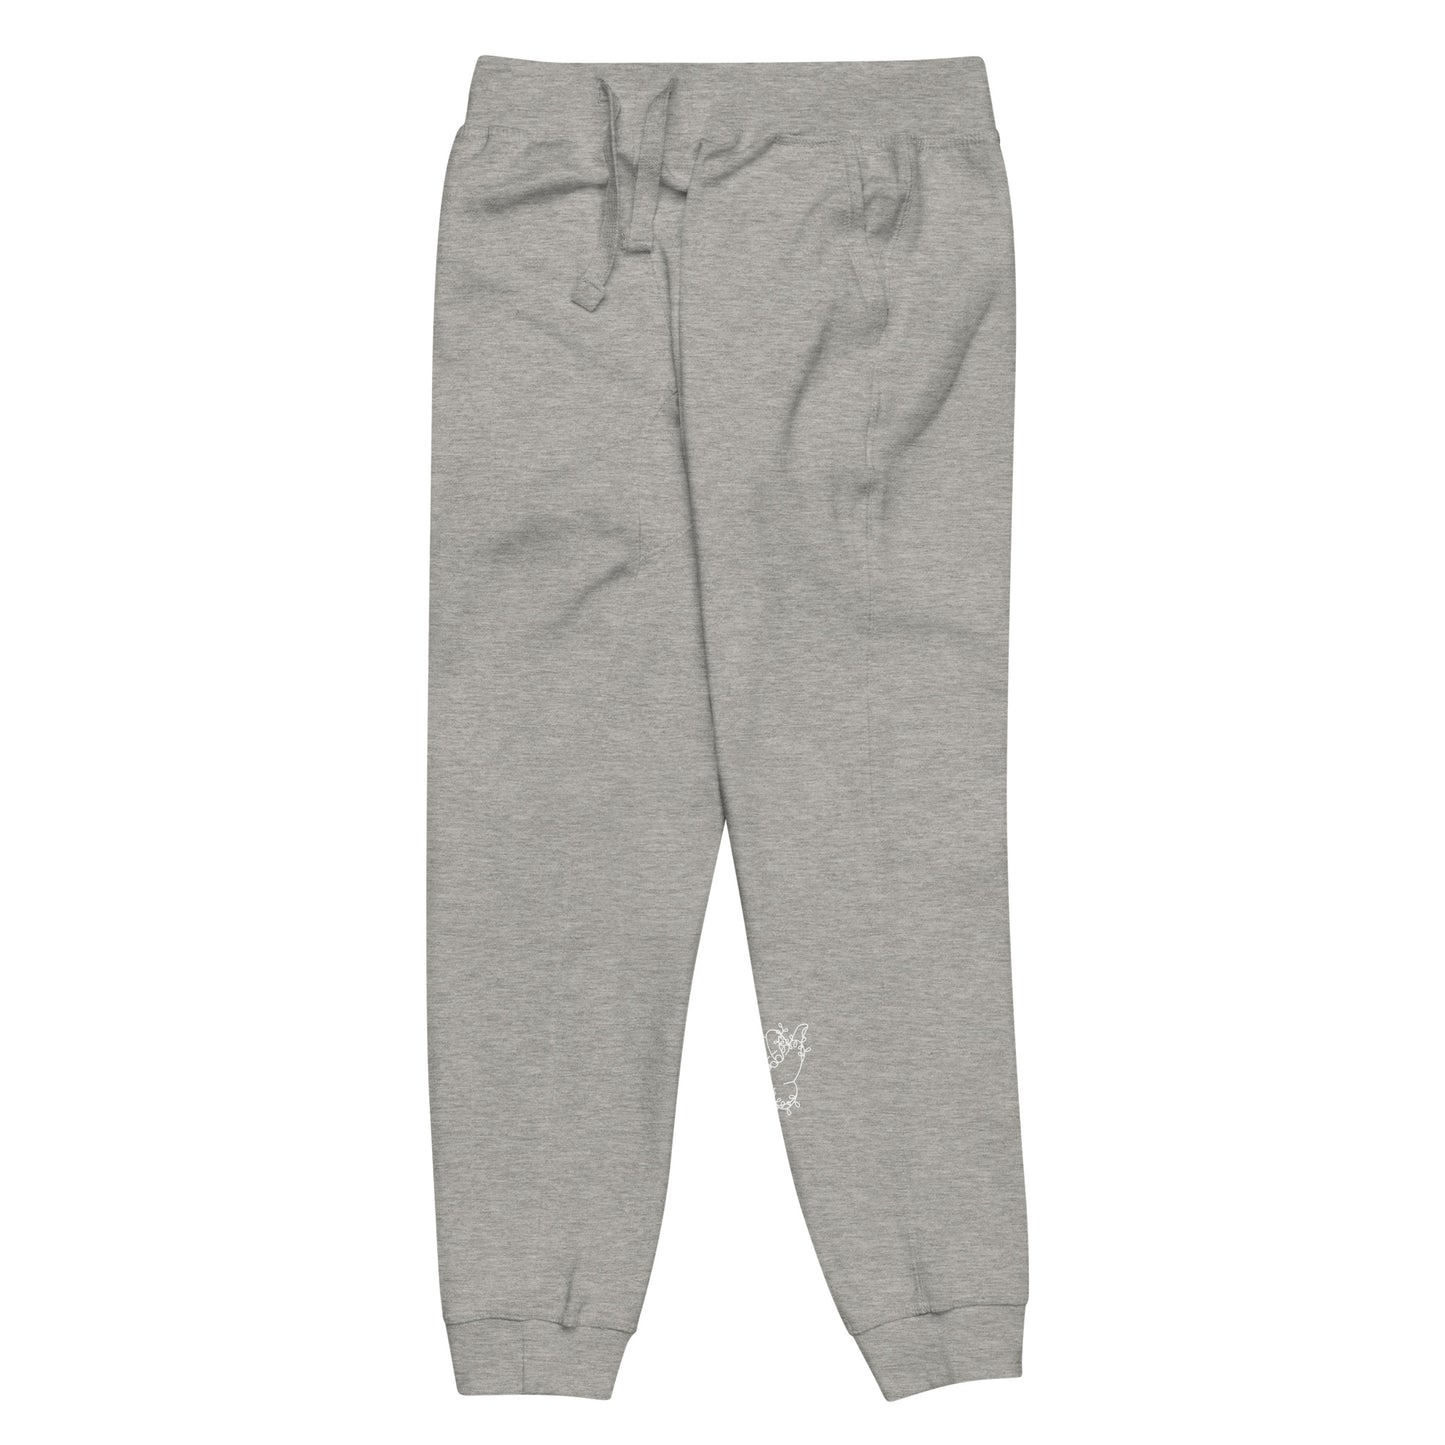 FORAL GNARLY Fleece Sweatpants